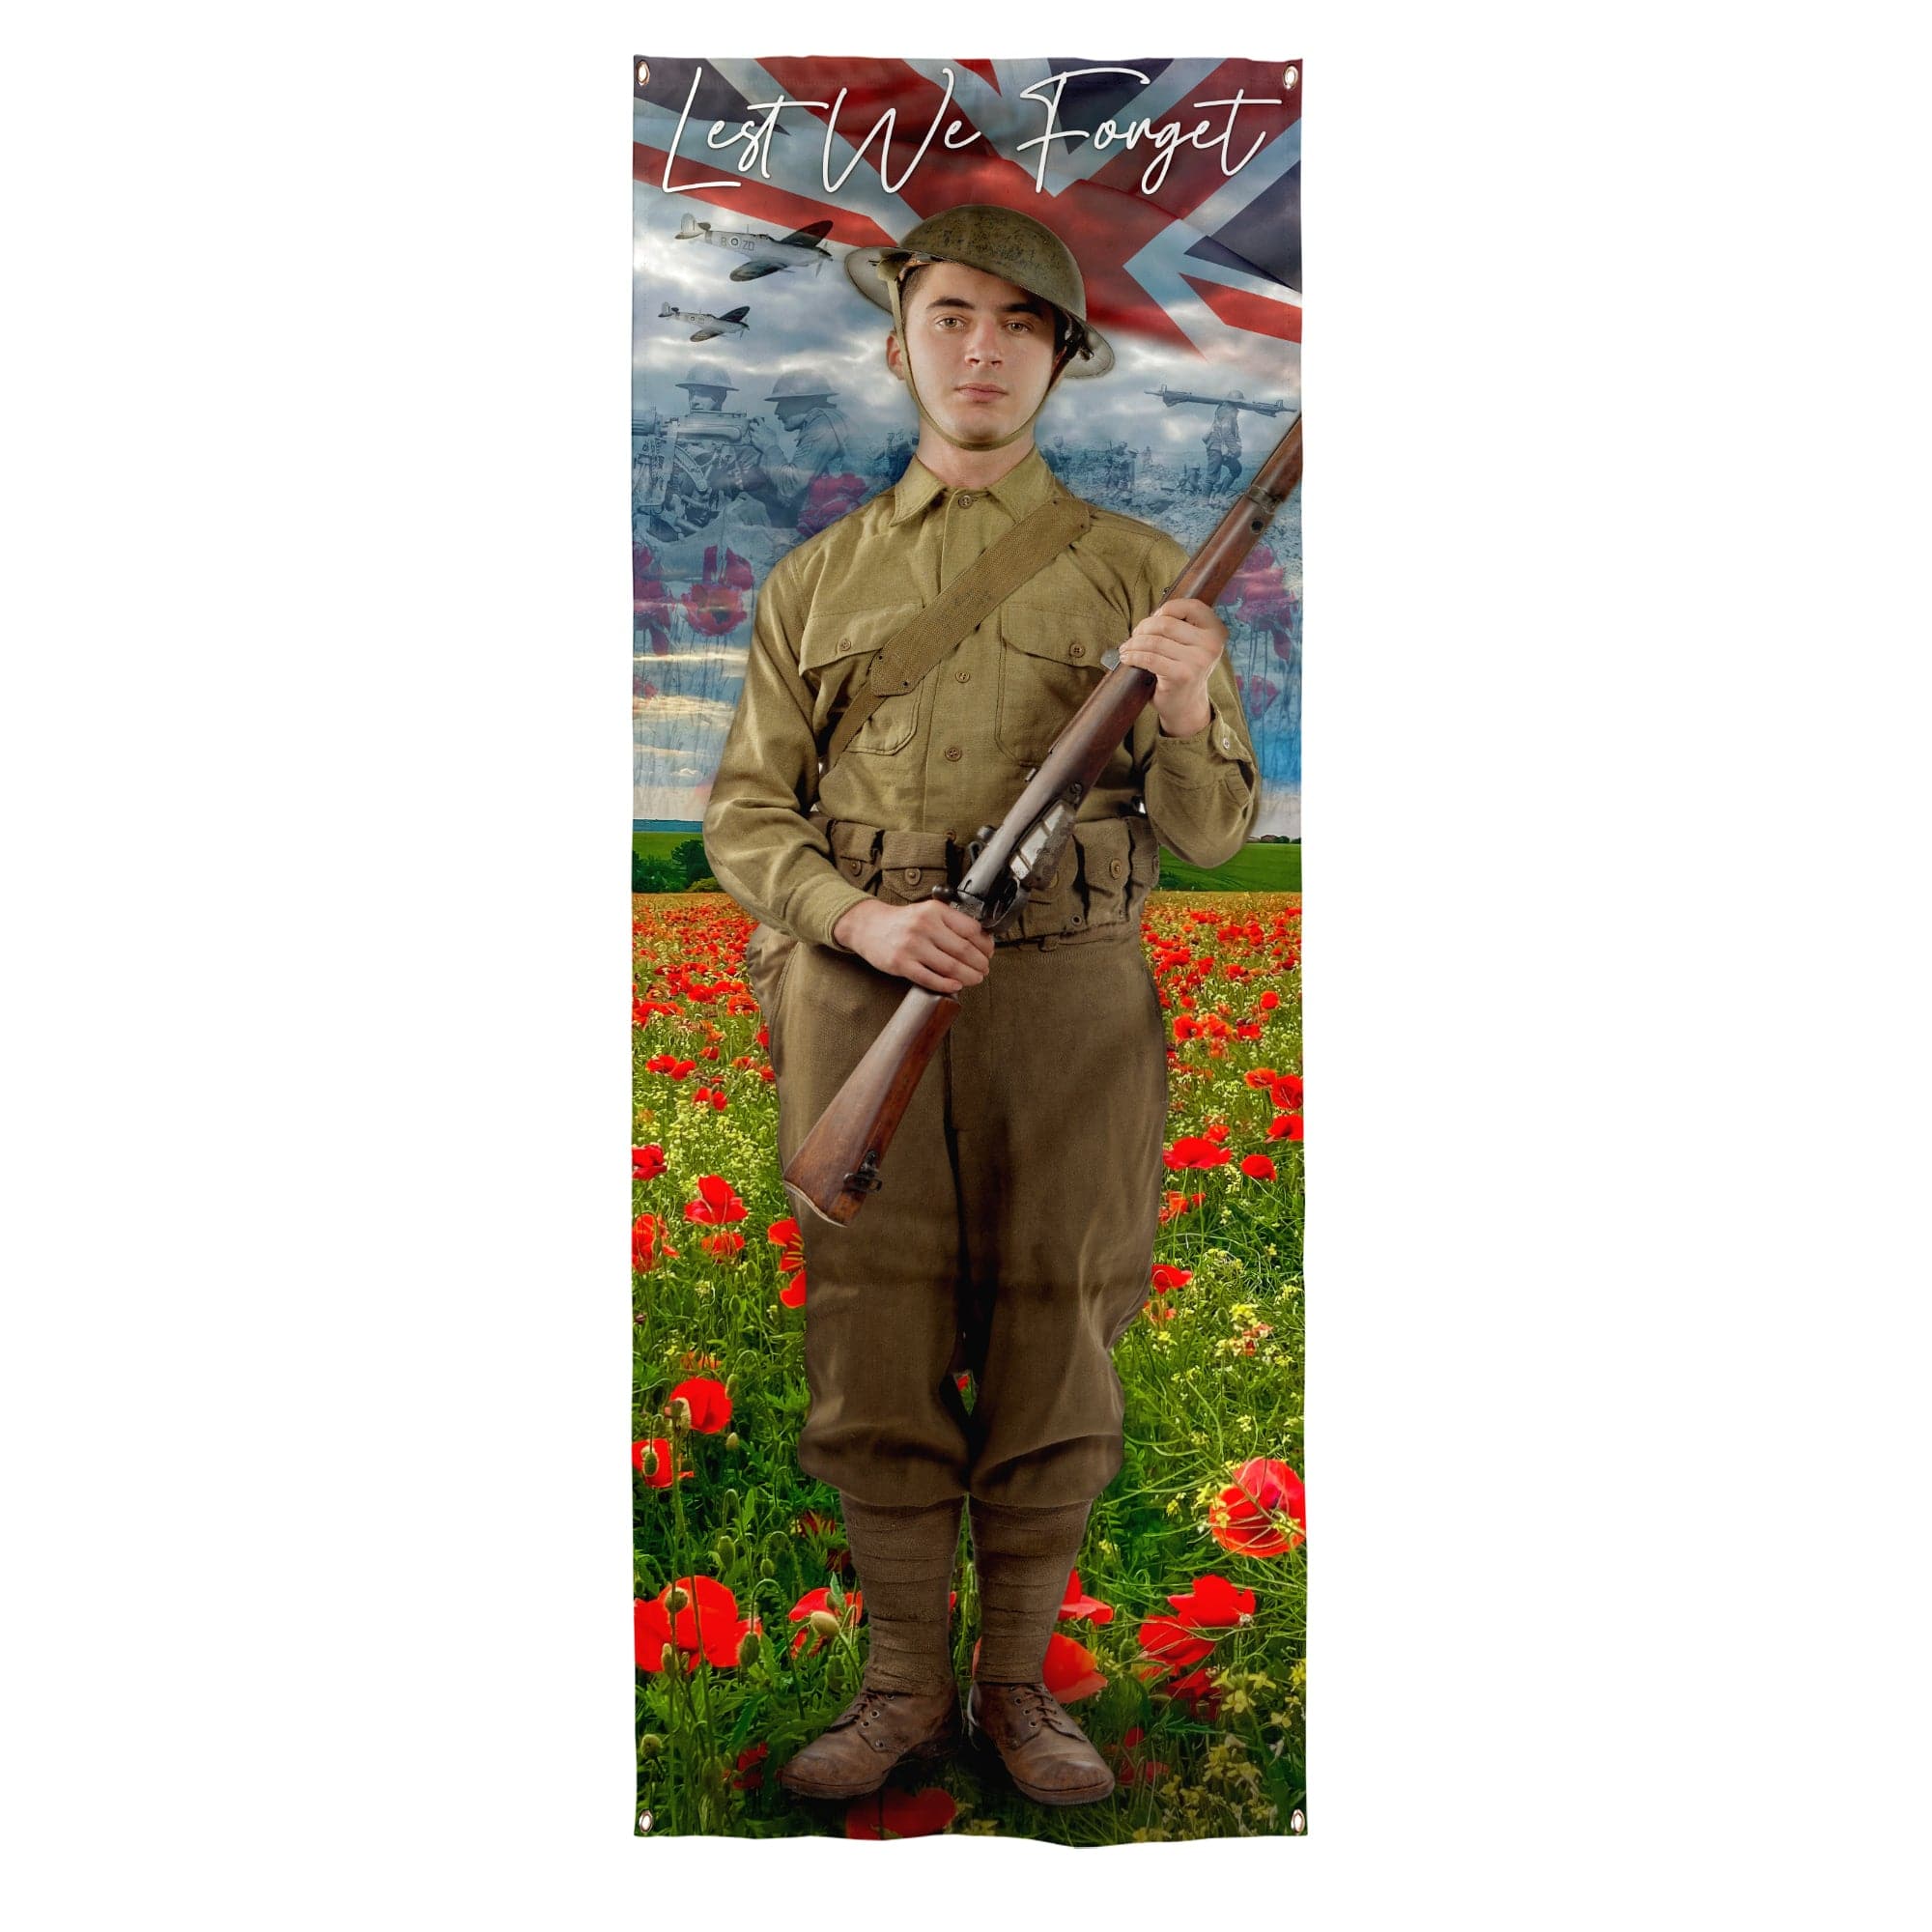 Personalised Text Remembrance Day Solider - Door Banner